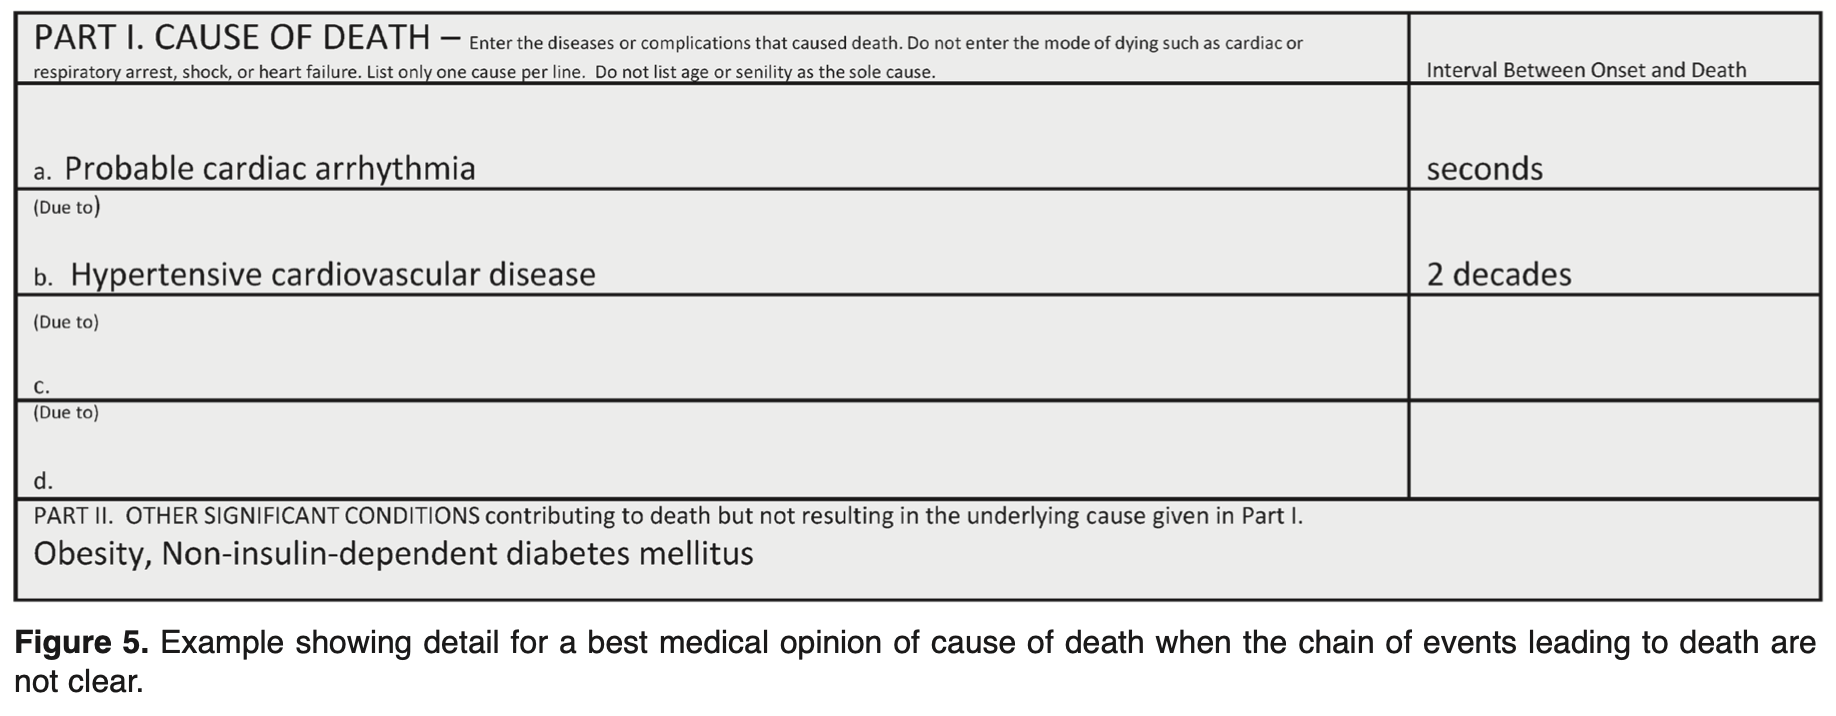 Figure 5. Example showing detail for a best medical opinion of cause of death when the chain of events leading to death are not clear.